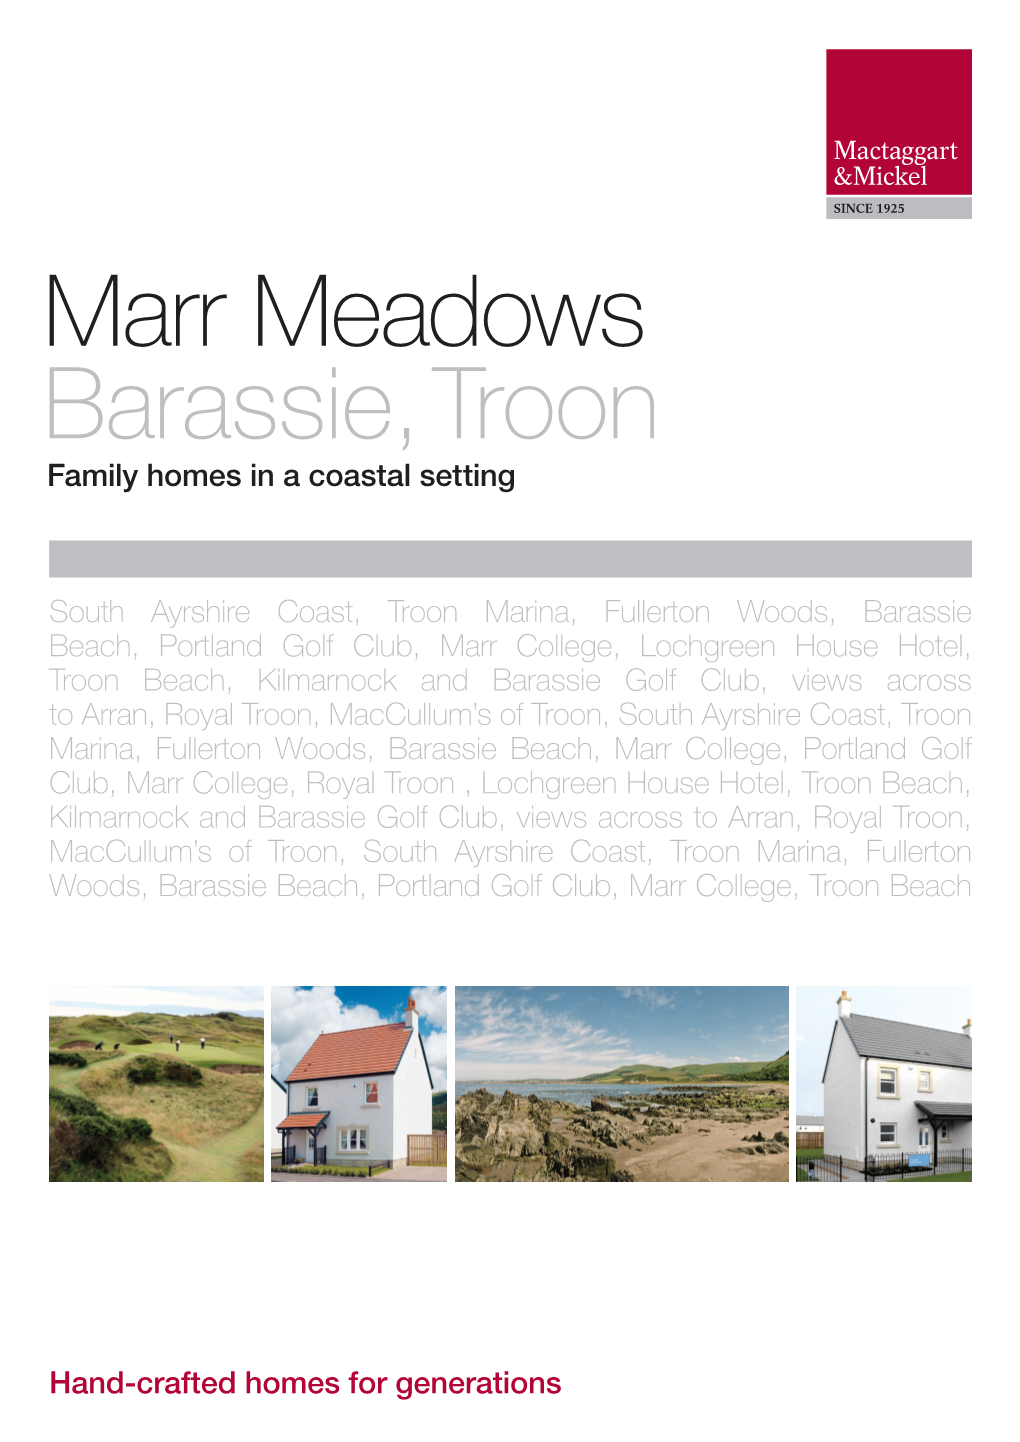 Marr Meadows Barassie, Troon Family Homes in a Coastal Setting